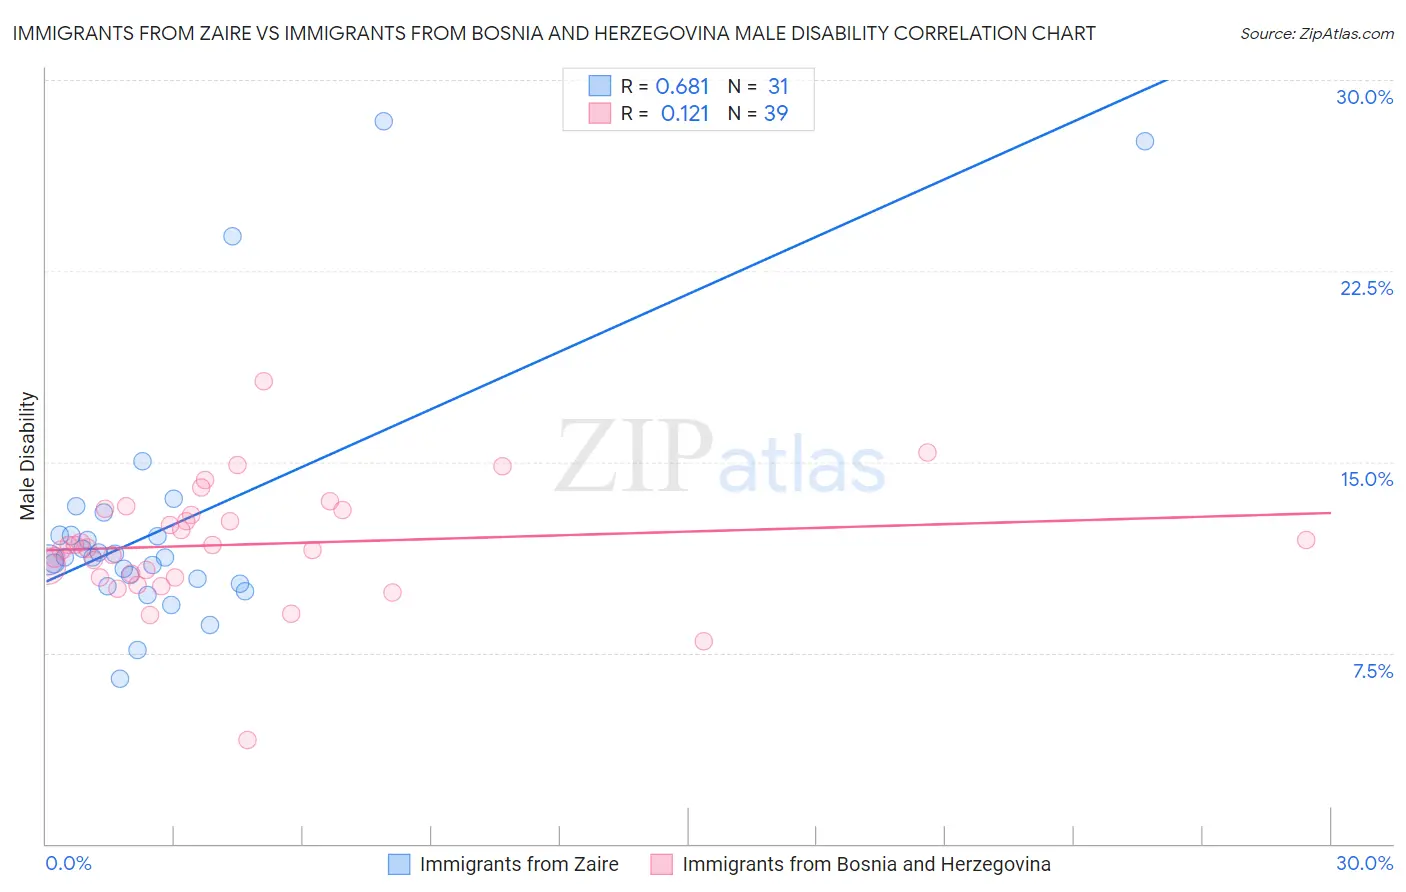 Immigrants from Zaire vs Immigrants from Bosnia and Herzegovina Male Disability